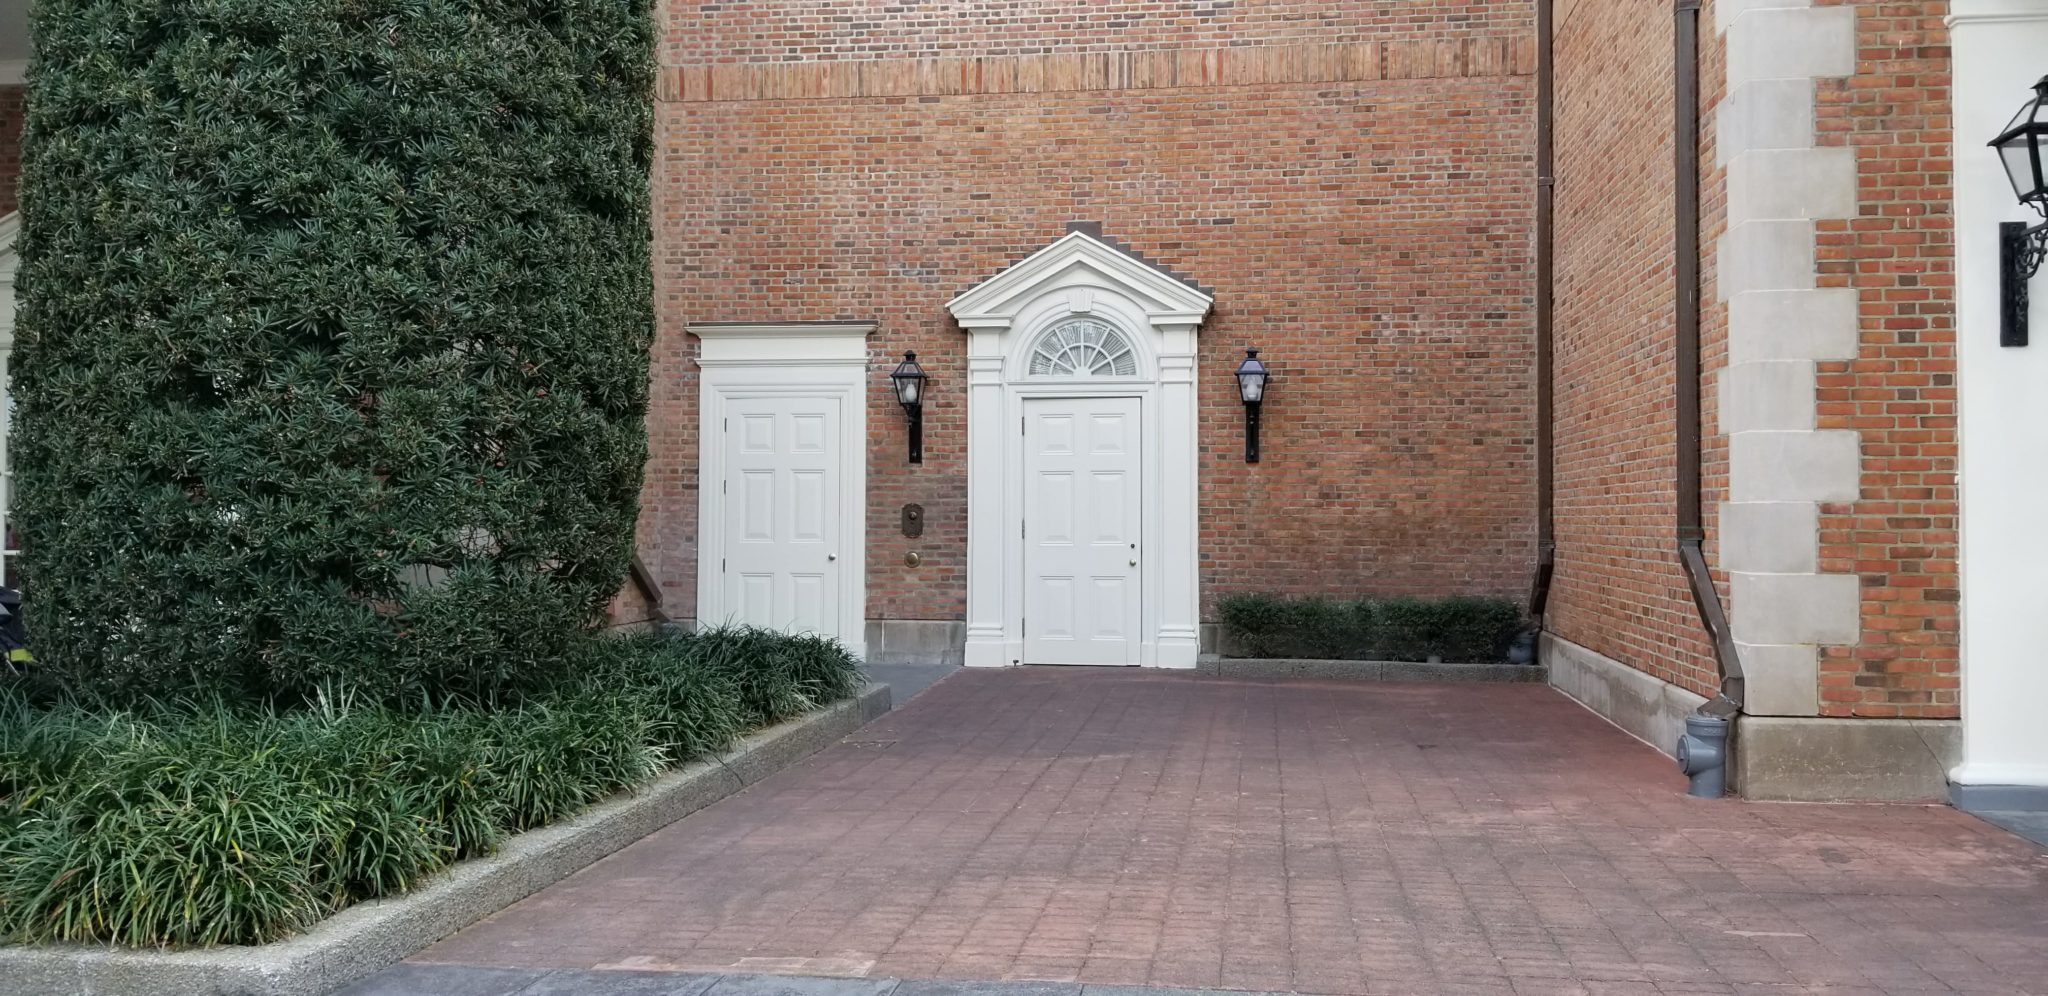 Could Club 33 Be Coming To The American Pavilion in Epcot?